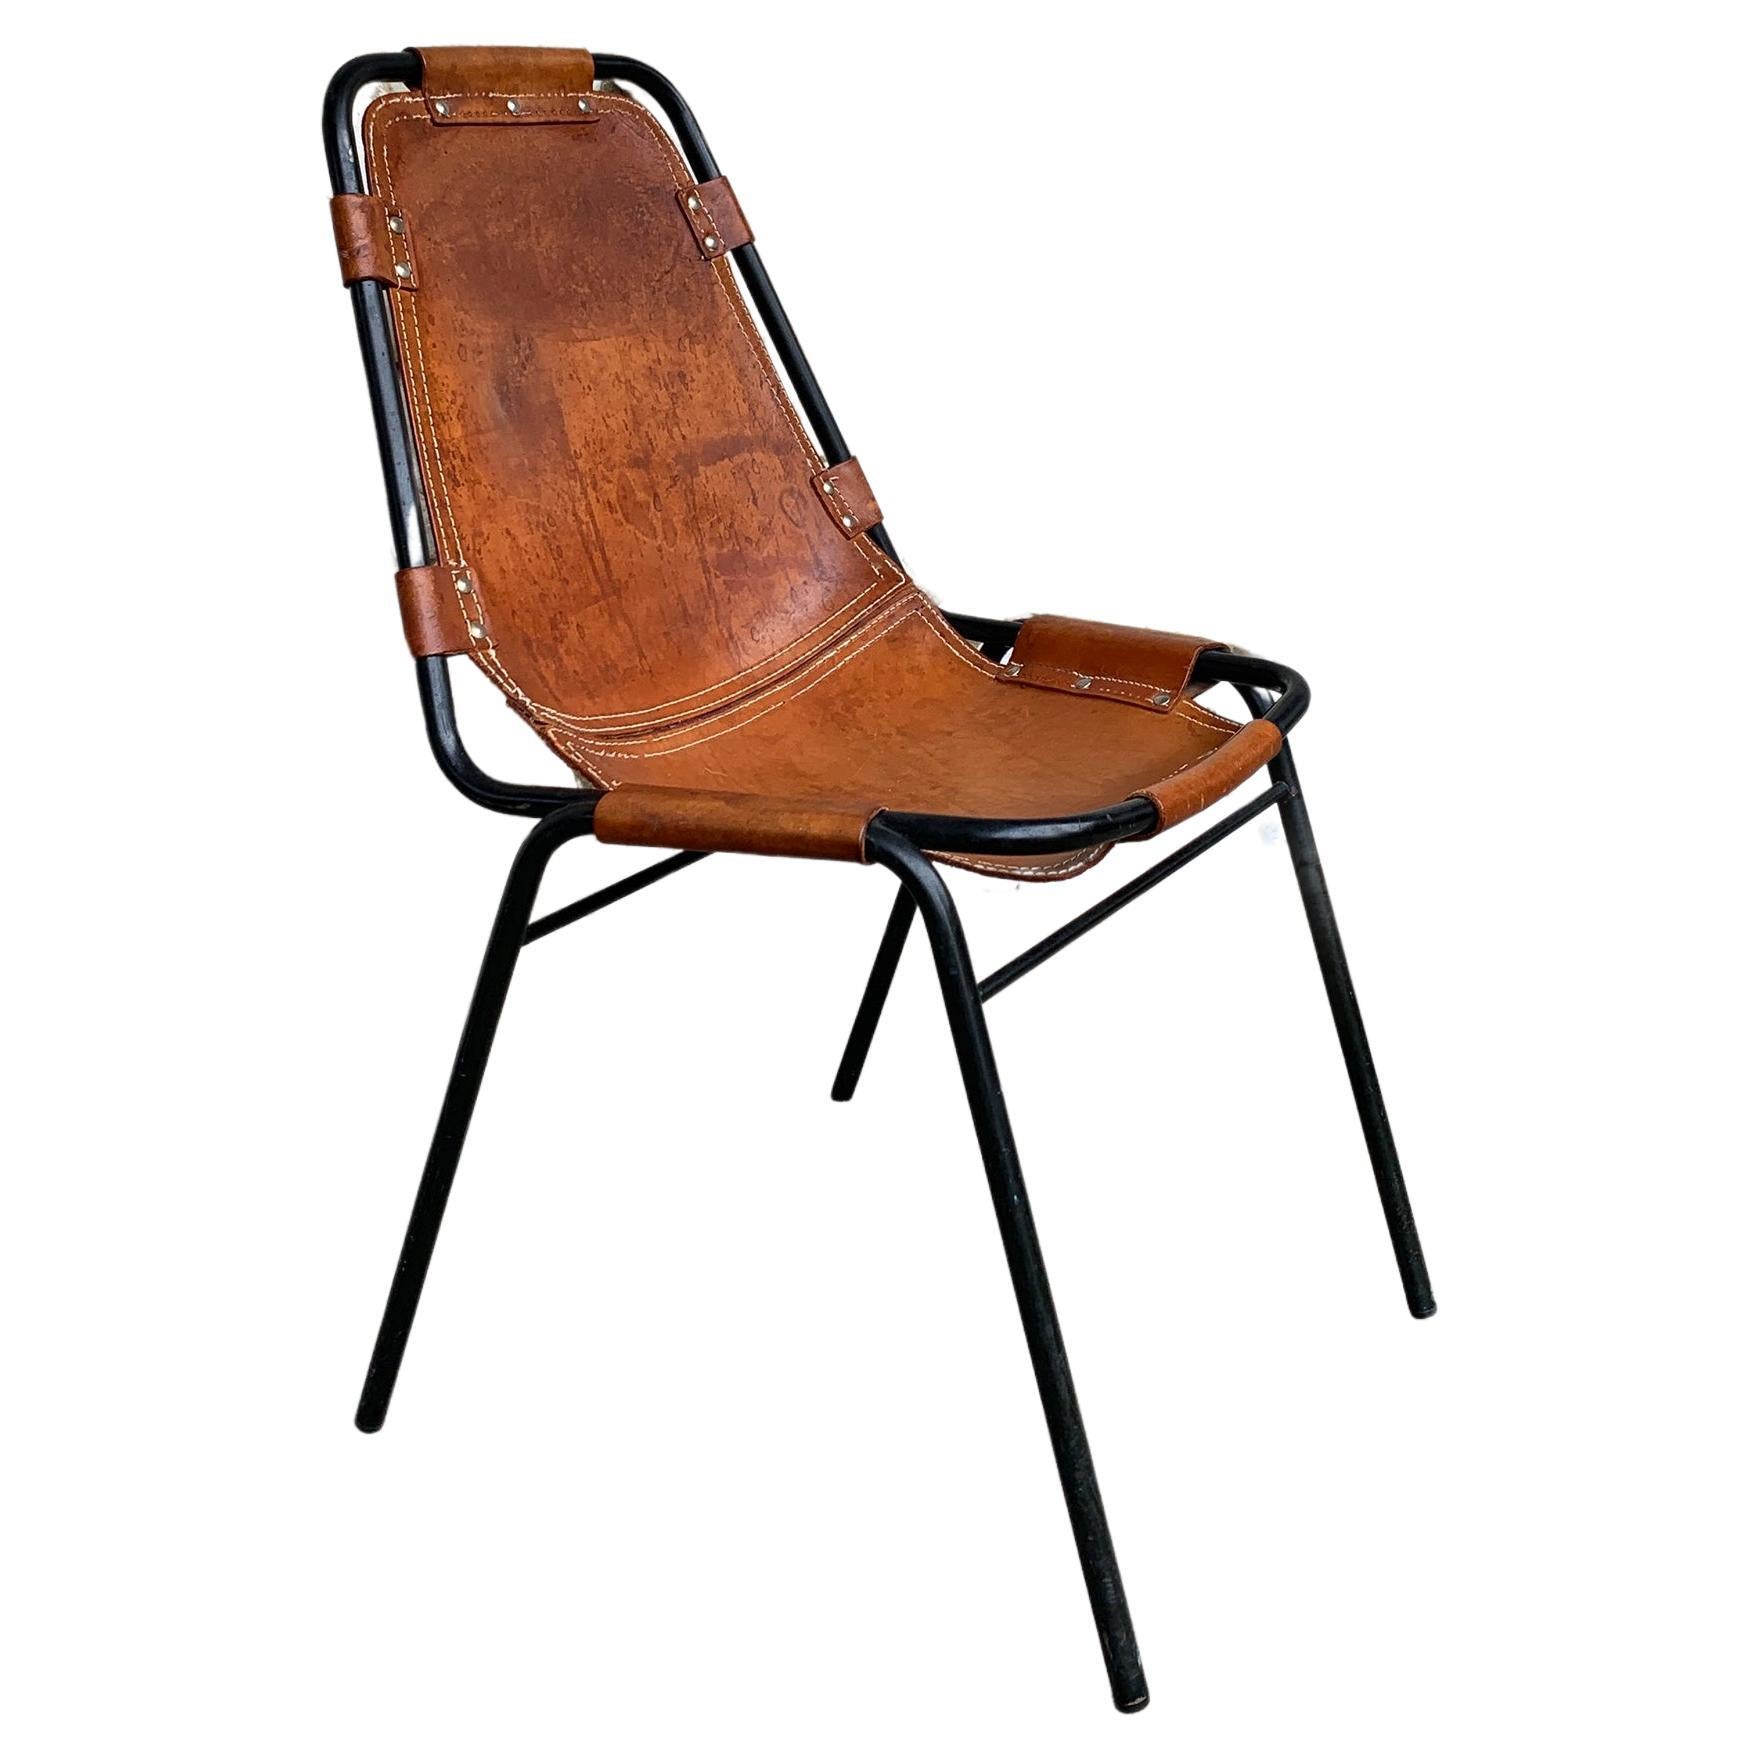 Vintage Les Arcs Dining Chair Selected by Charlotte Perriand patinated Leather